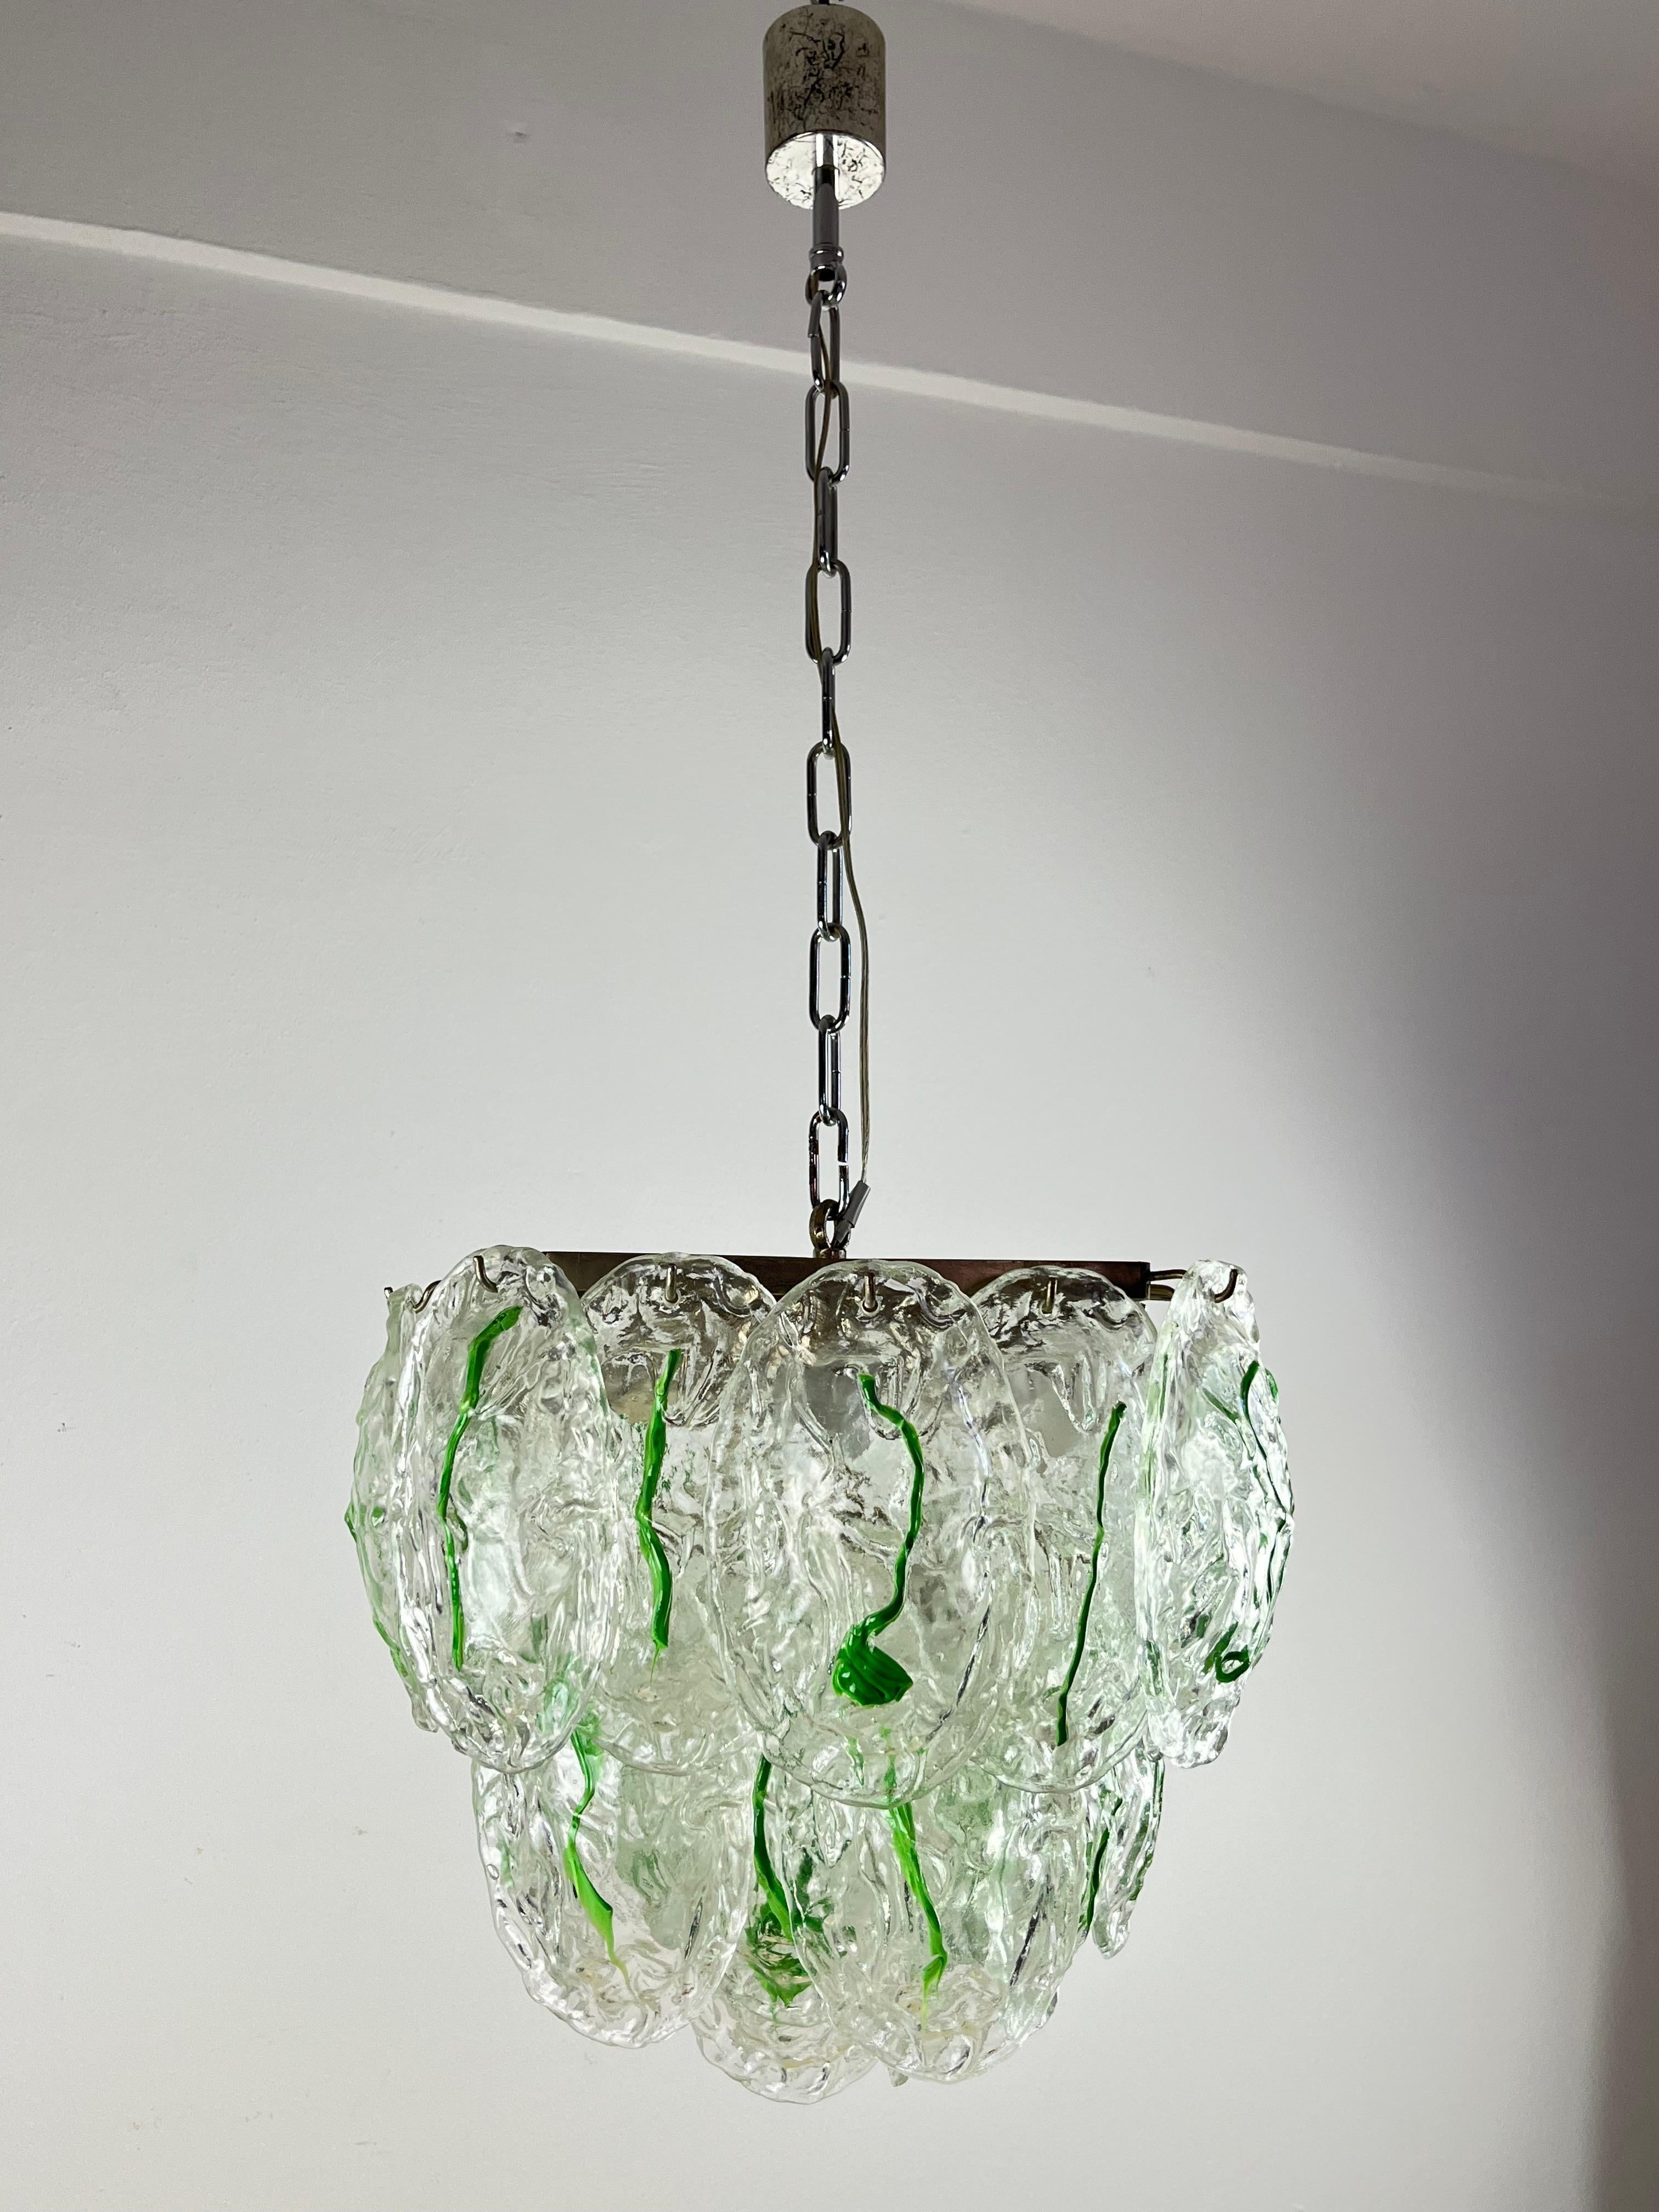 Six-light Murano glass chandelier by Vistosi, Italy, 1960s
Found in an interior designer's apartment, it is intact and functional. Composed of a metal structure where thirty-two oval glasses are hung. Very small signs of aging on the